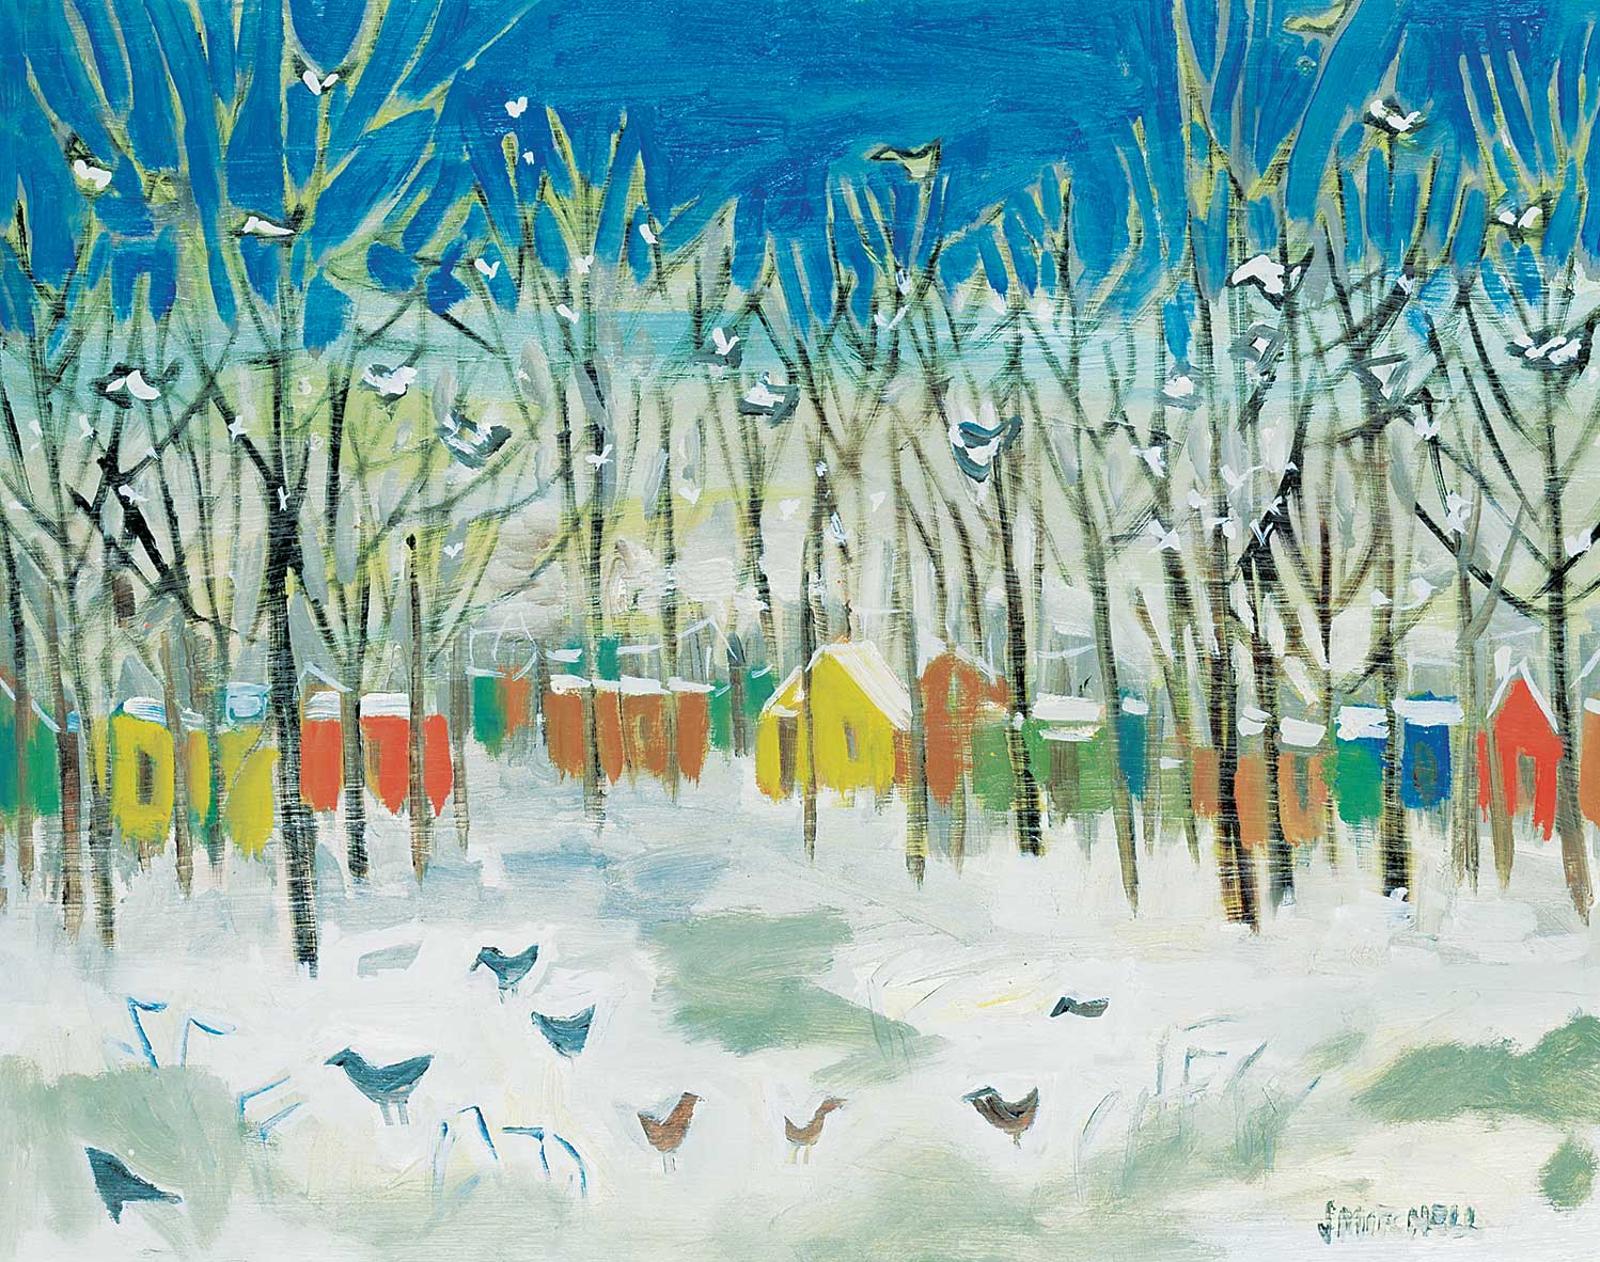 Janet Mitchell (1915-1998) - Winter at the Resort